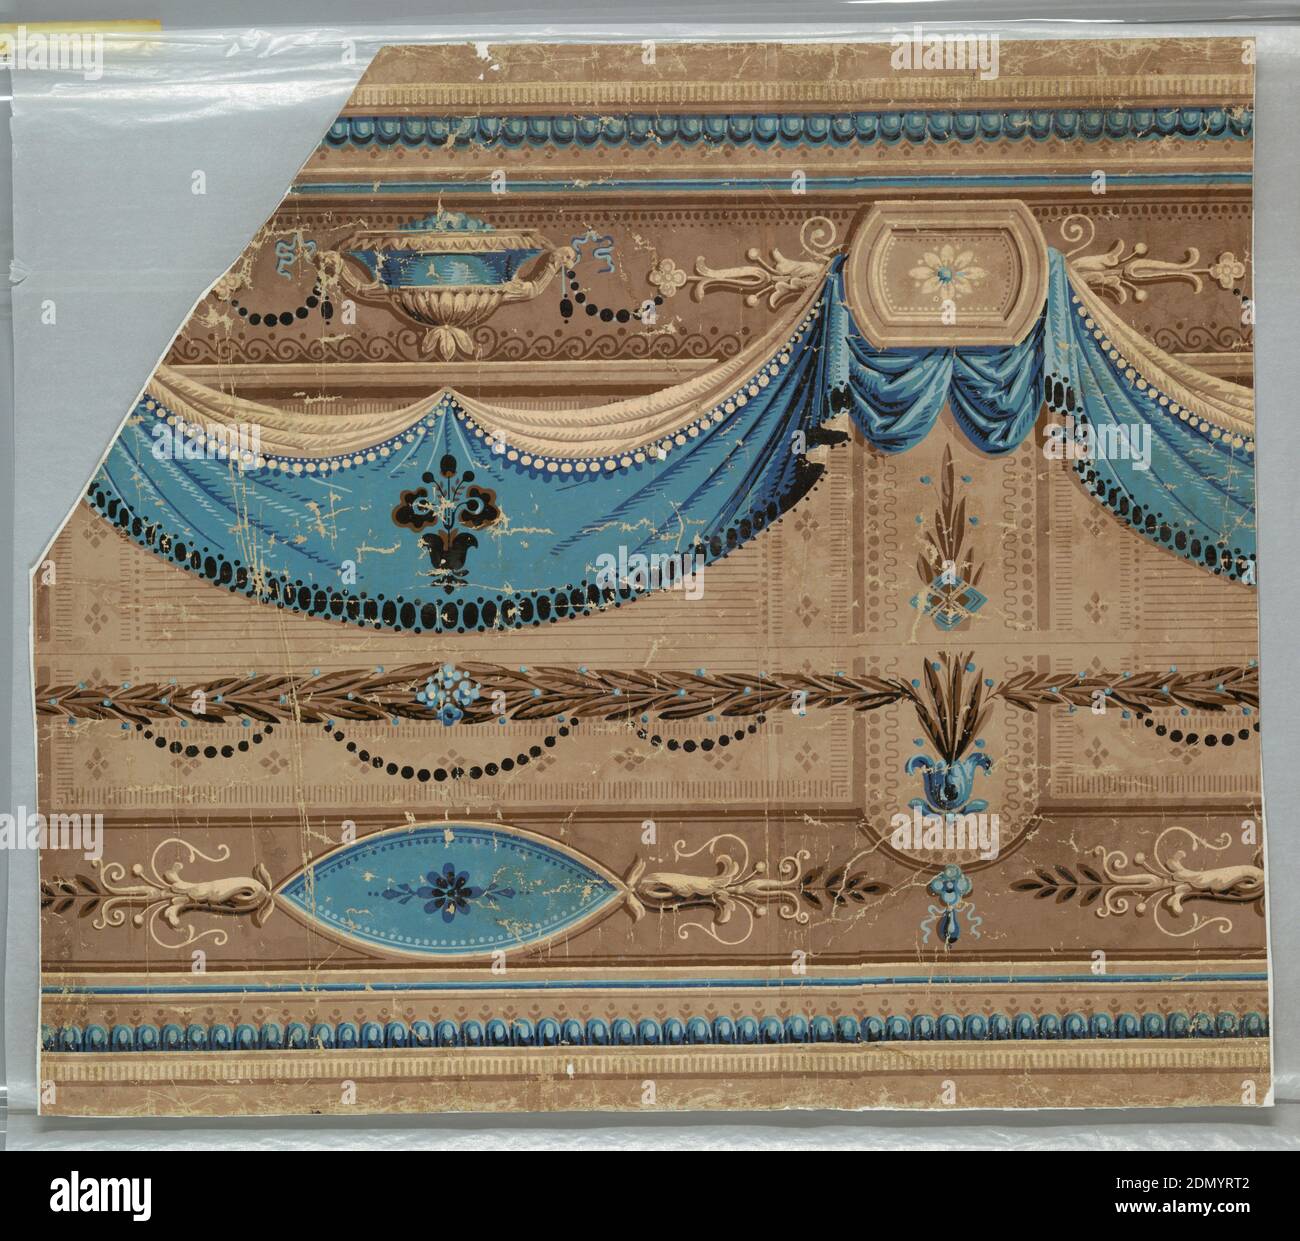 Frieze, Block-printed paper, Frieze of drapery, urns, classic-revival architectural ornament. Beige ground divided into horizontal bandings by brown and blue molding, horizontal pointed elipses with floral and foliate ornamentation, and groupings of parallel lines and geometric shapes. Frieze dominated by draped swags, bright blue, above which are blue urns and which appear draped from small round-ended panels with flower centers. Panels top vertical banding of browns which interrupts horizontals of rest of the ground., France, 1840s, Wallcoverings, Frieze Stock Photo